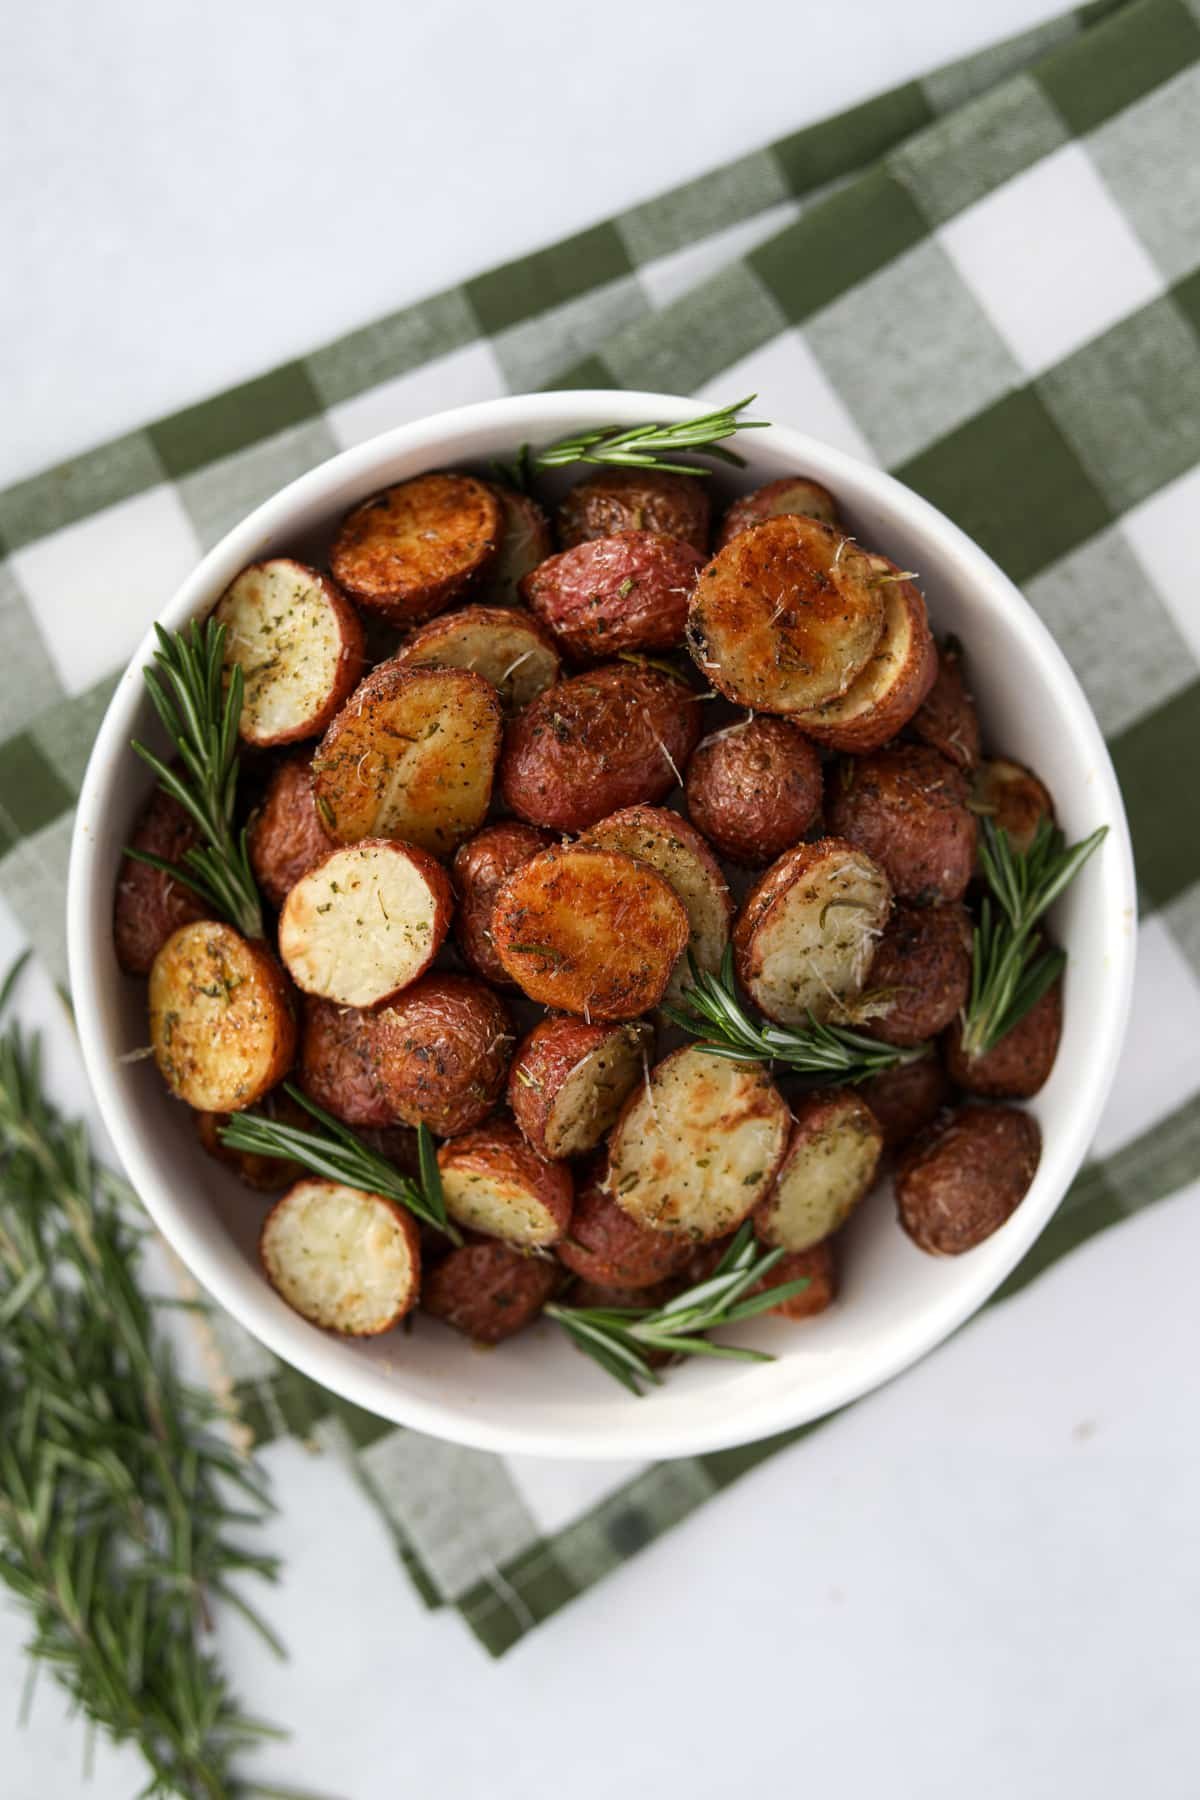 A bowl of roasted potatoes garnished with fresh rosemary sprigs.